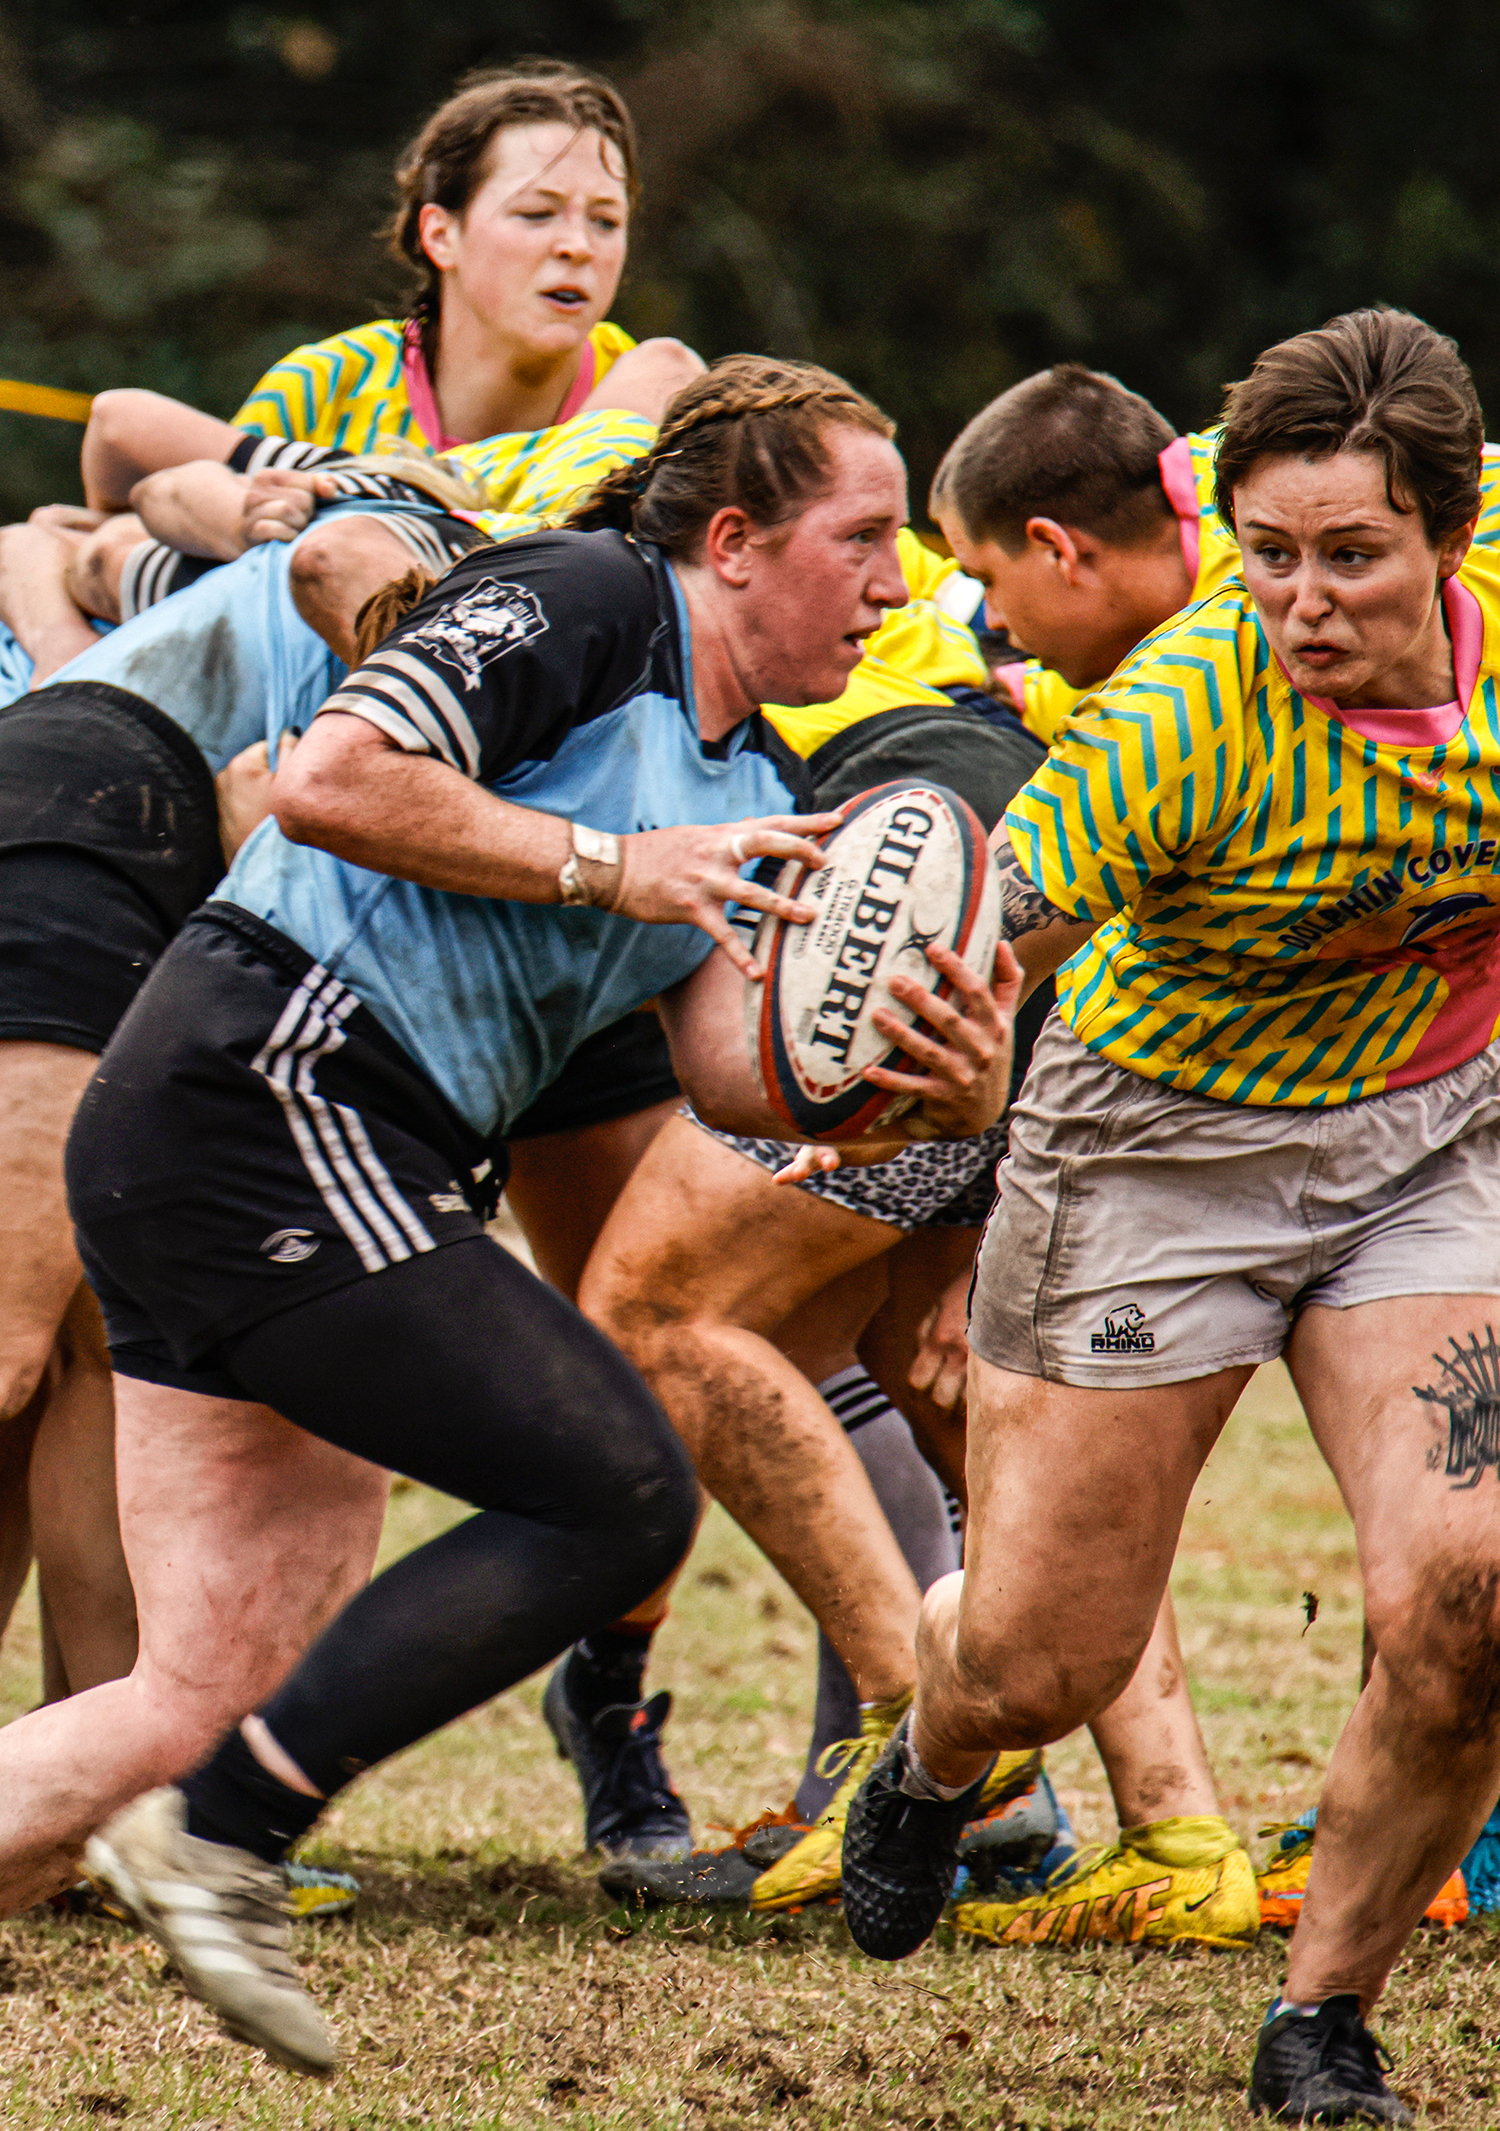 The back person in the scrum advances the ball as a scrum breaks up in the background.